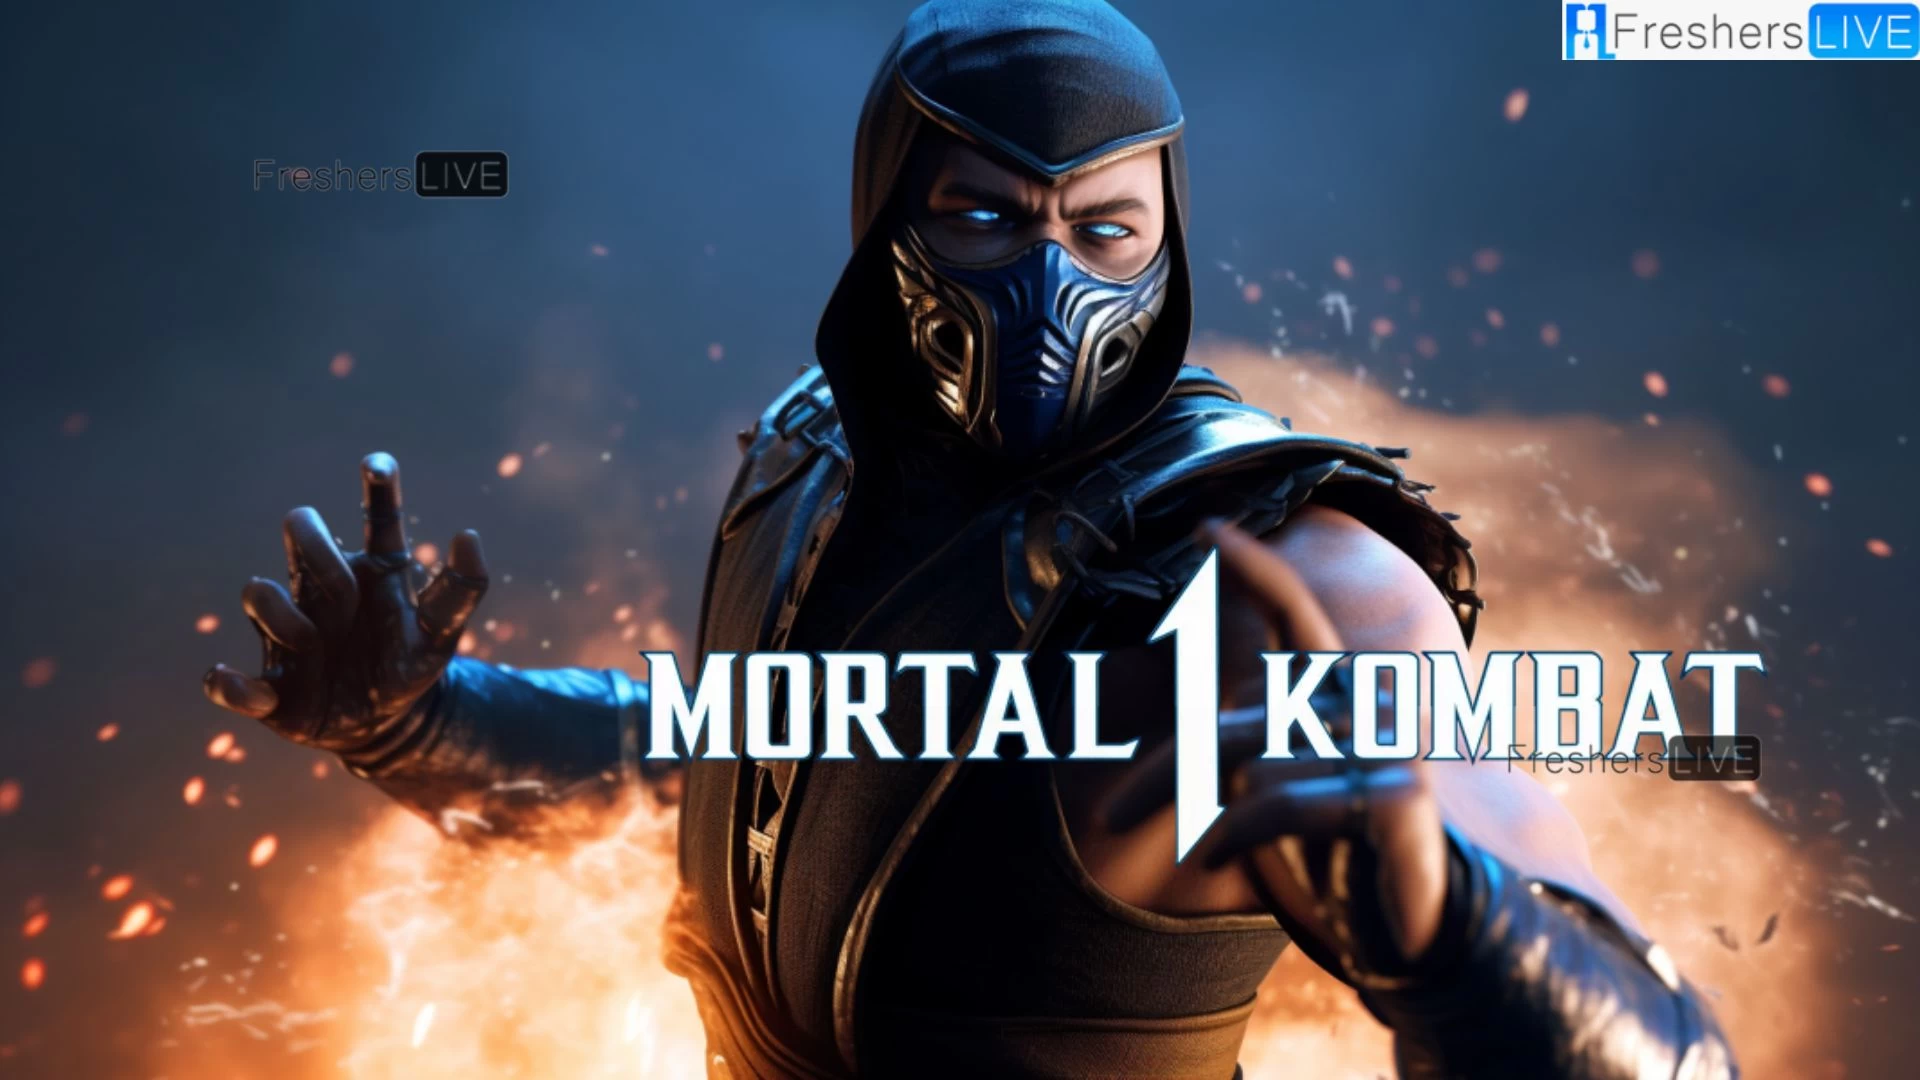 Mortal Kombat 1 Private Match Not Working, How to Fix Mortal Kombat 1 Private Match Not Working?